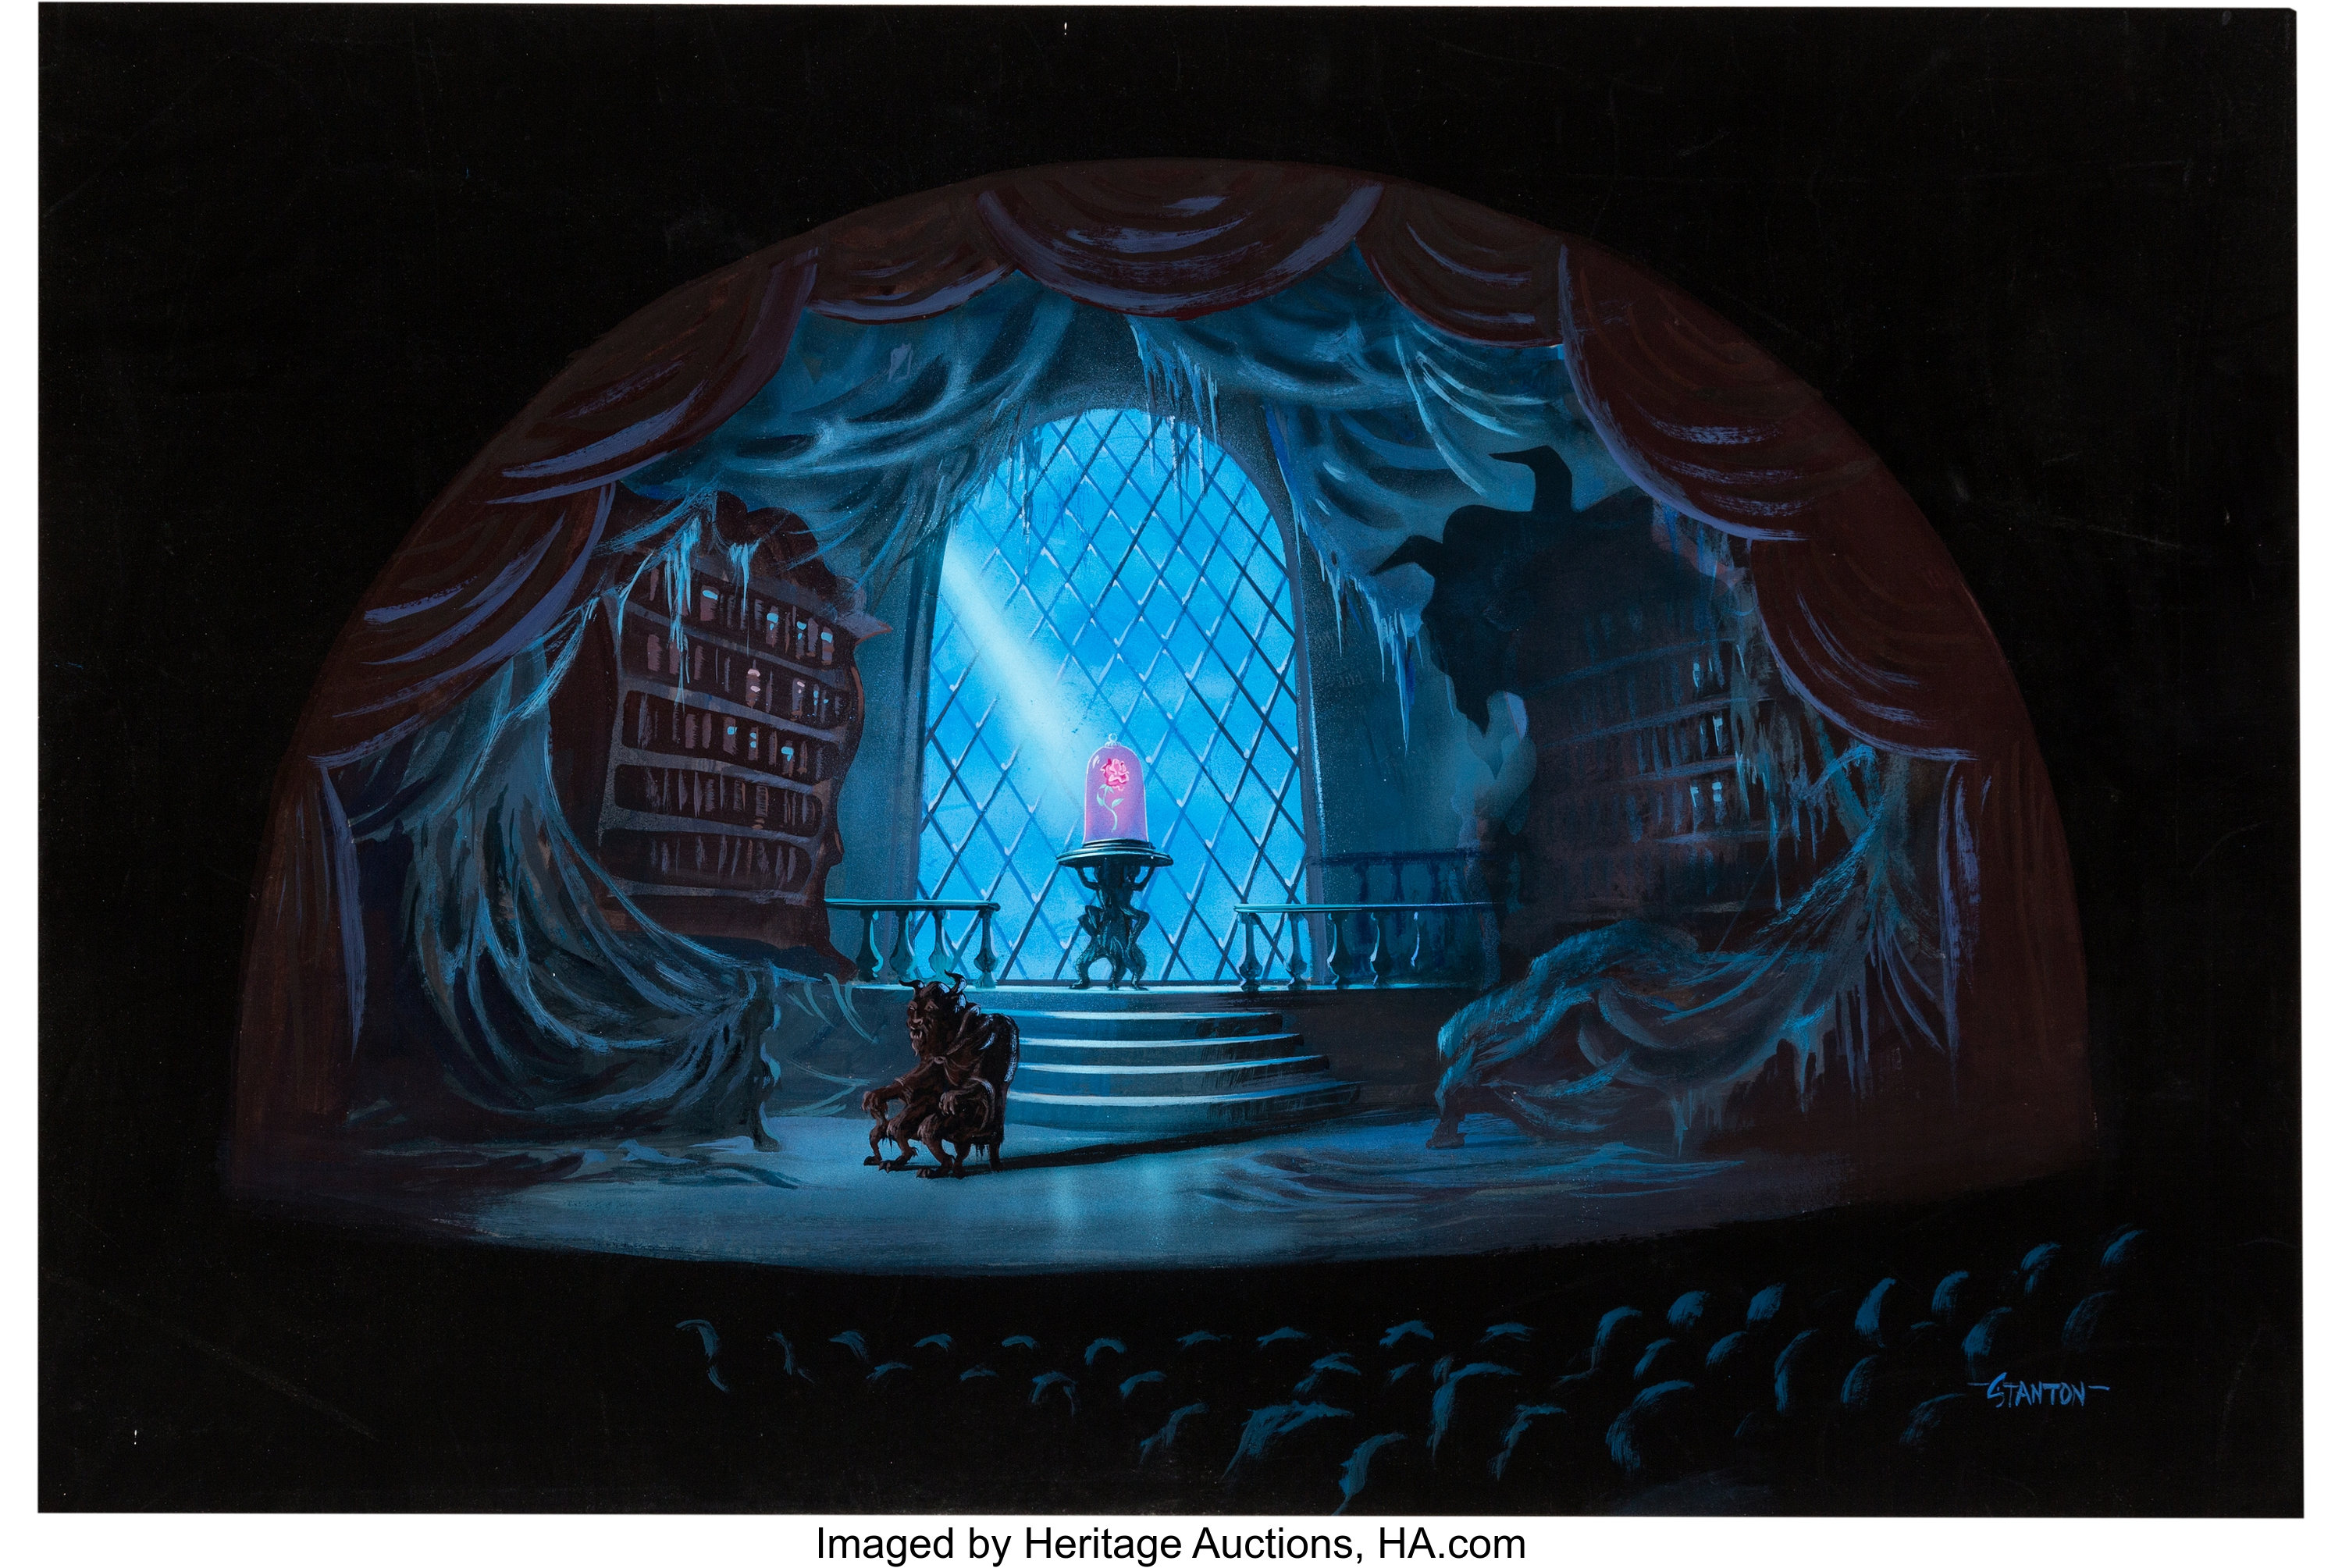 beauty and the beast concept art